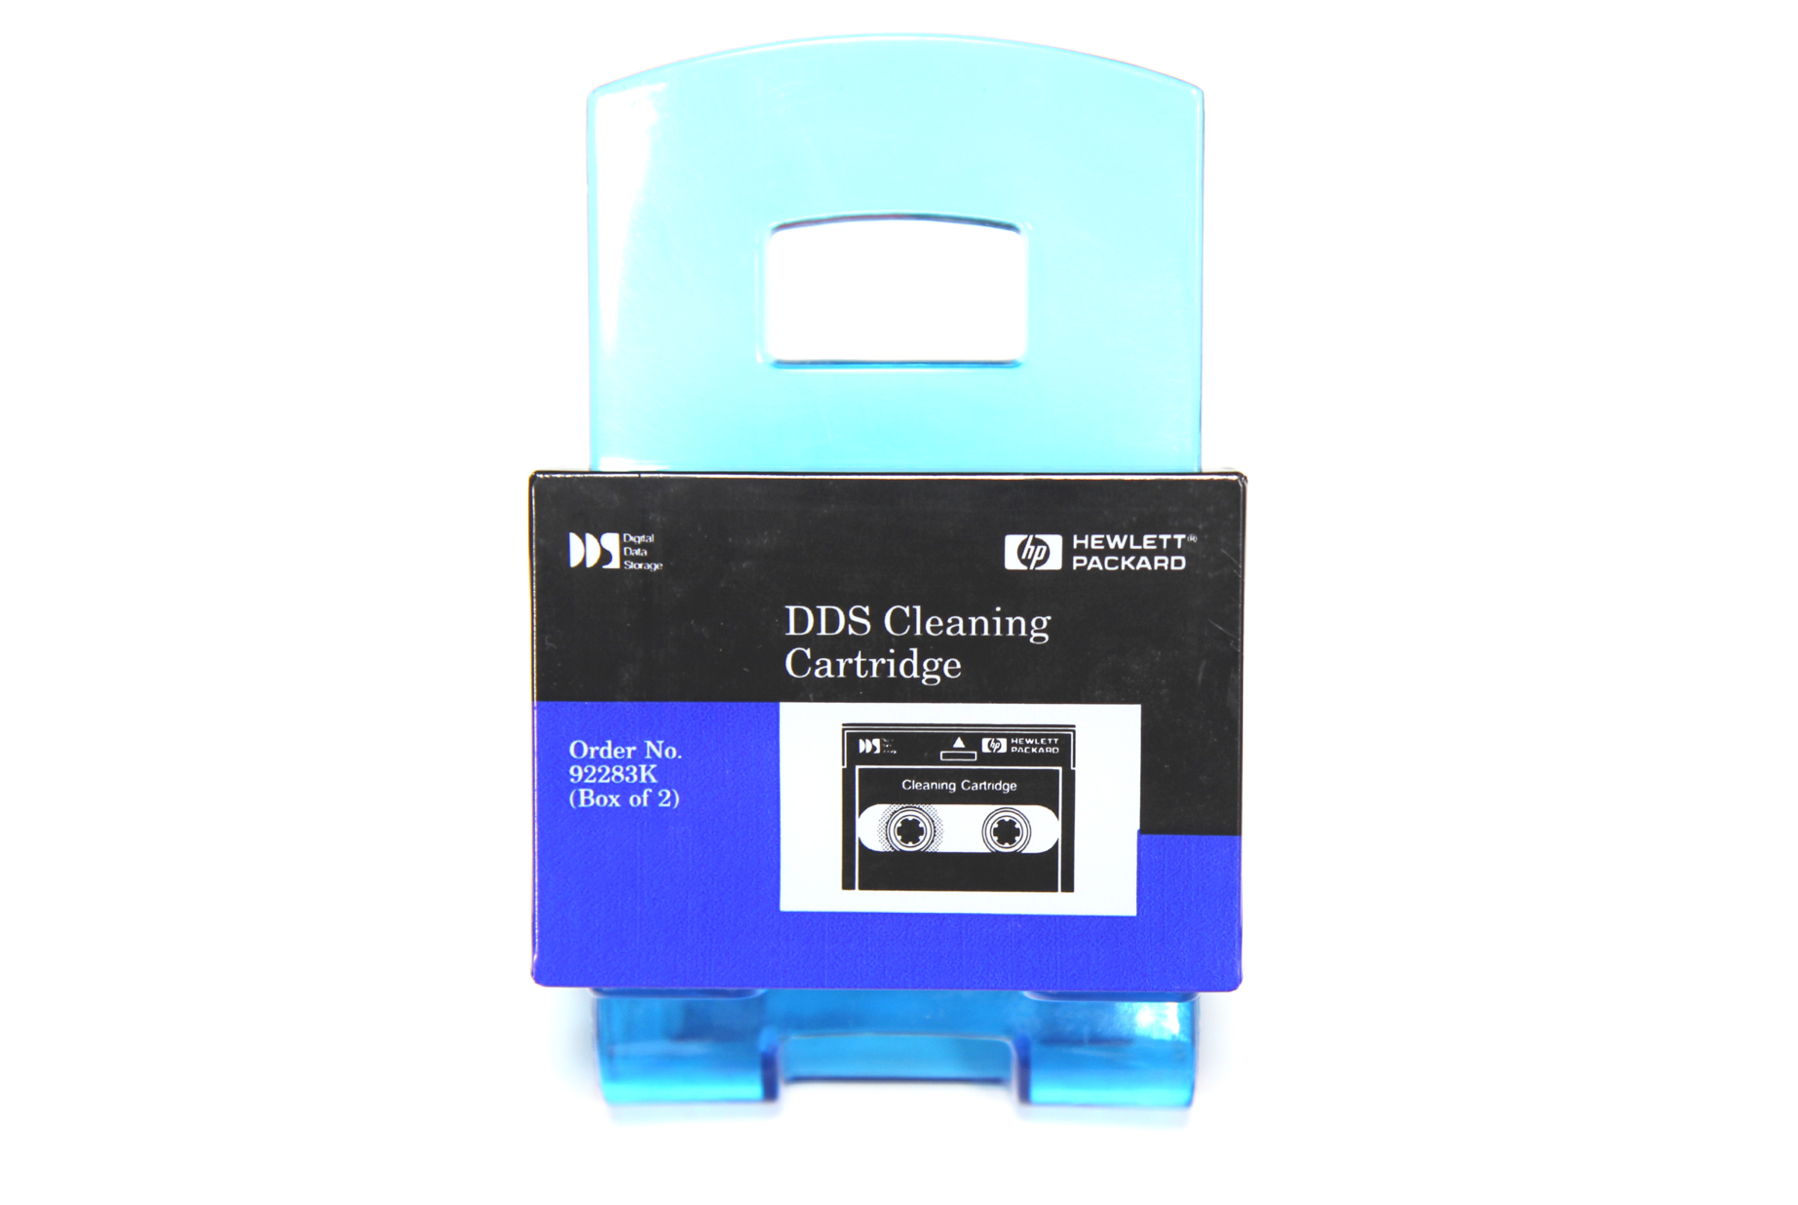 HP DDS Cleaning Cartridge